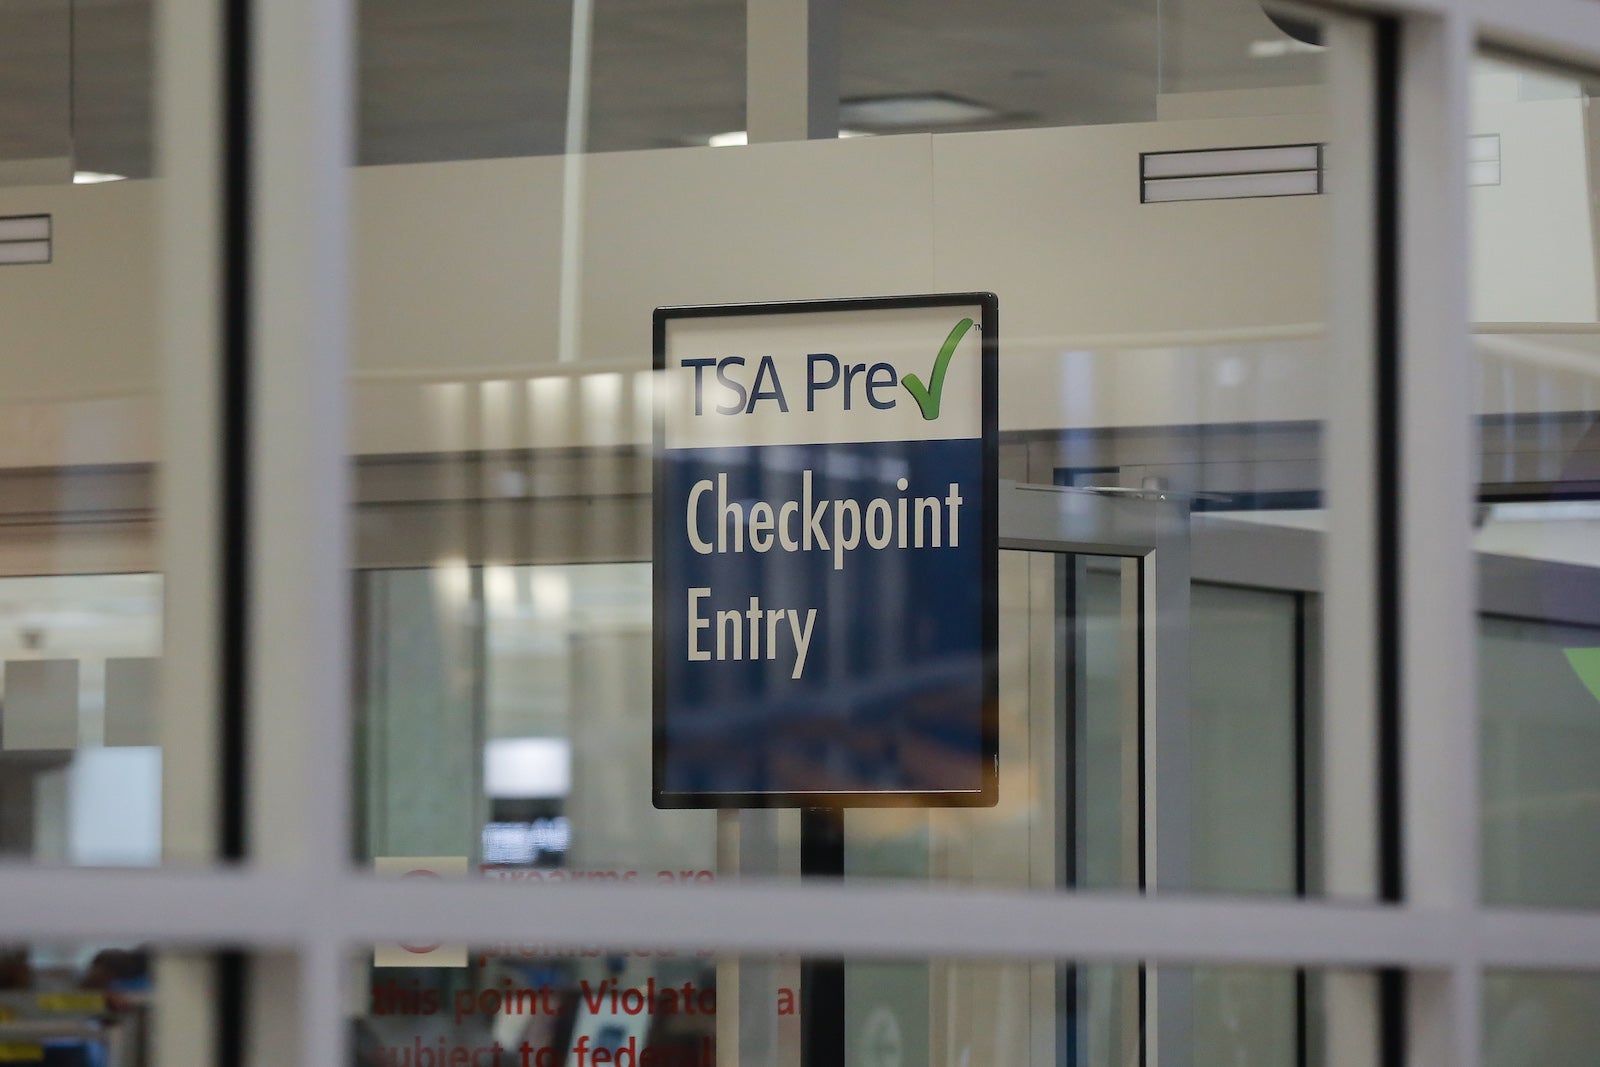 Which airports and airlines use TSA PreCheck?